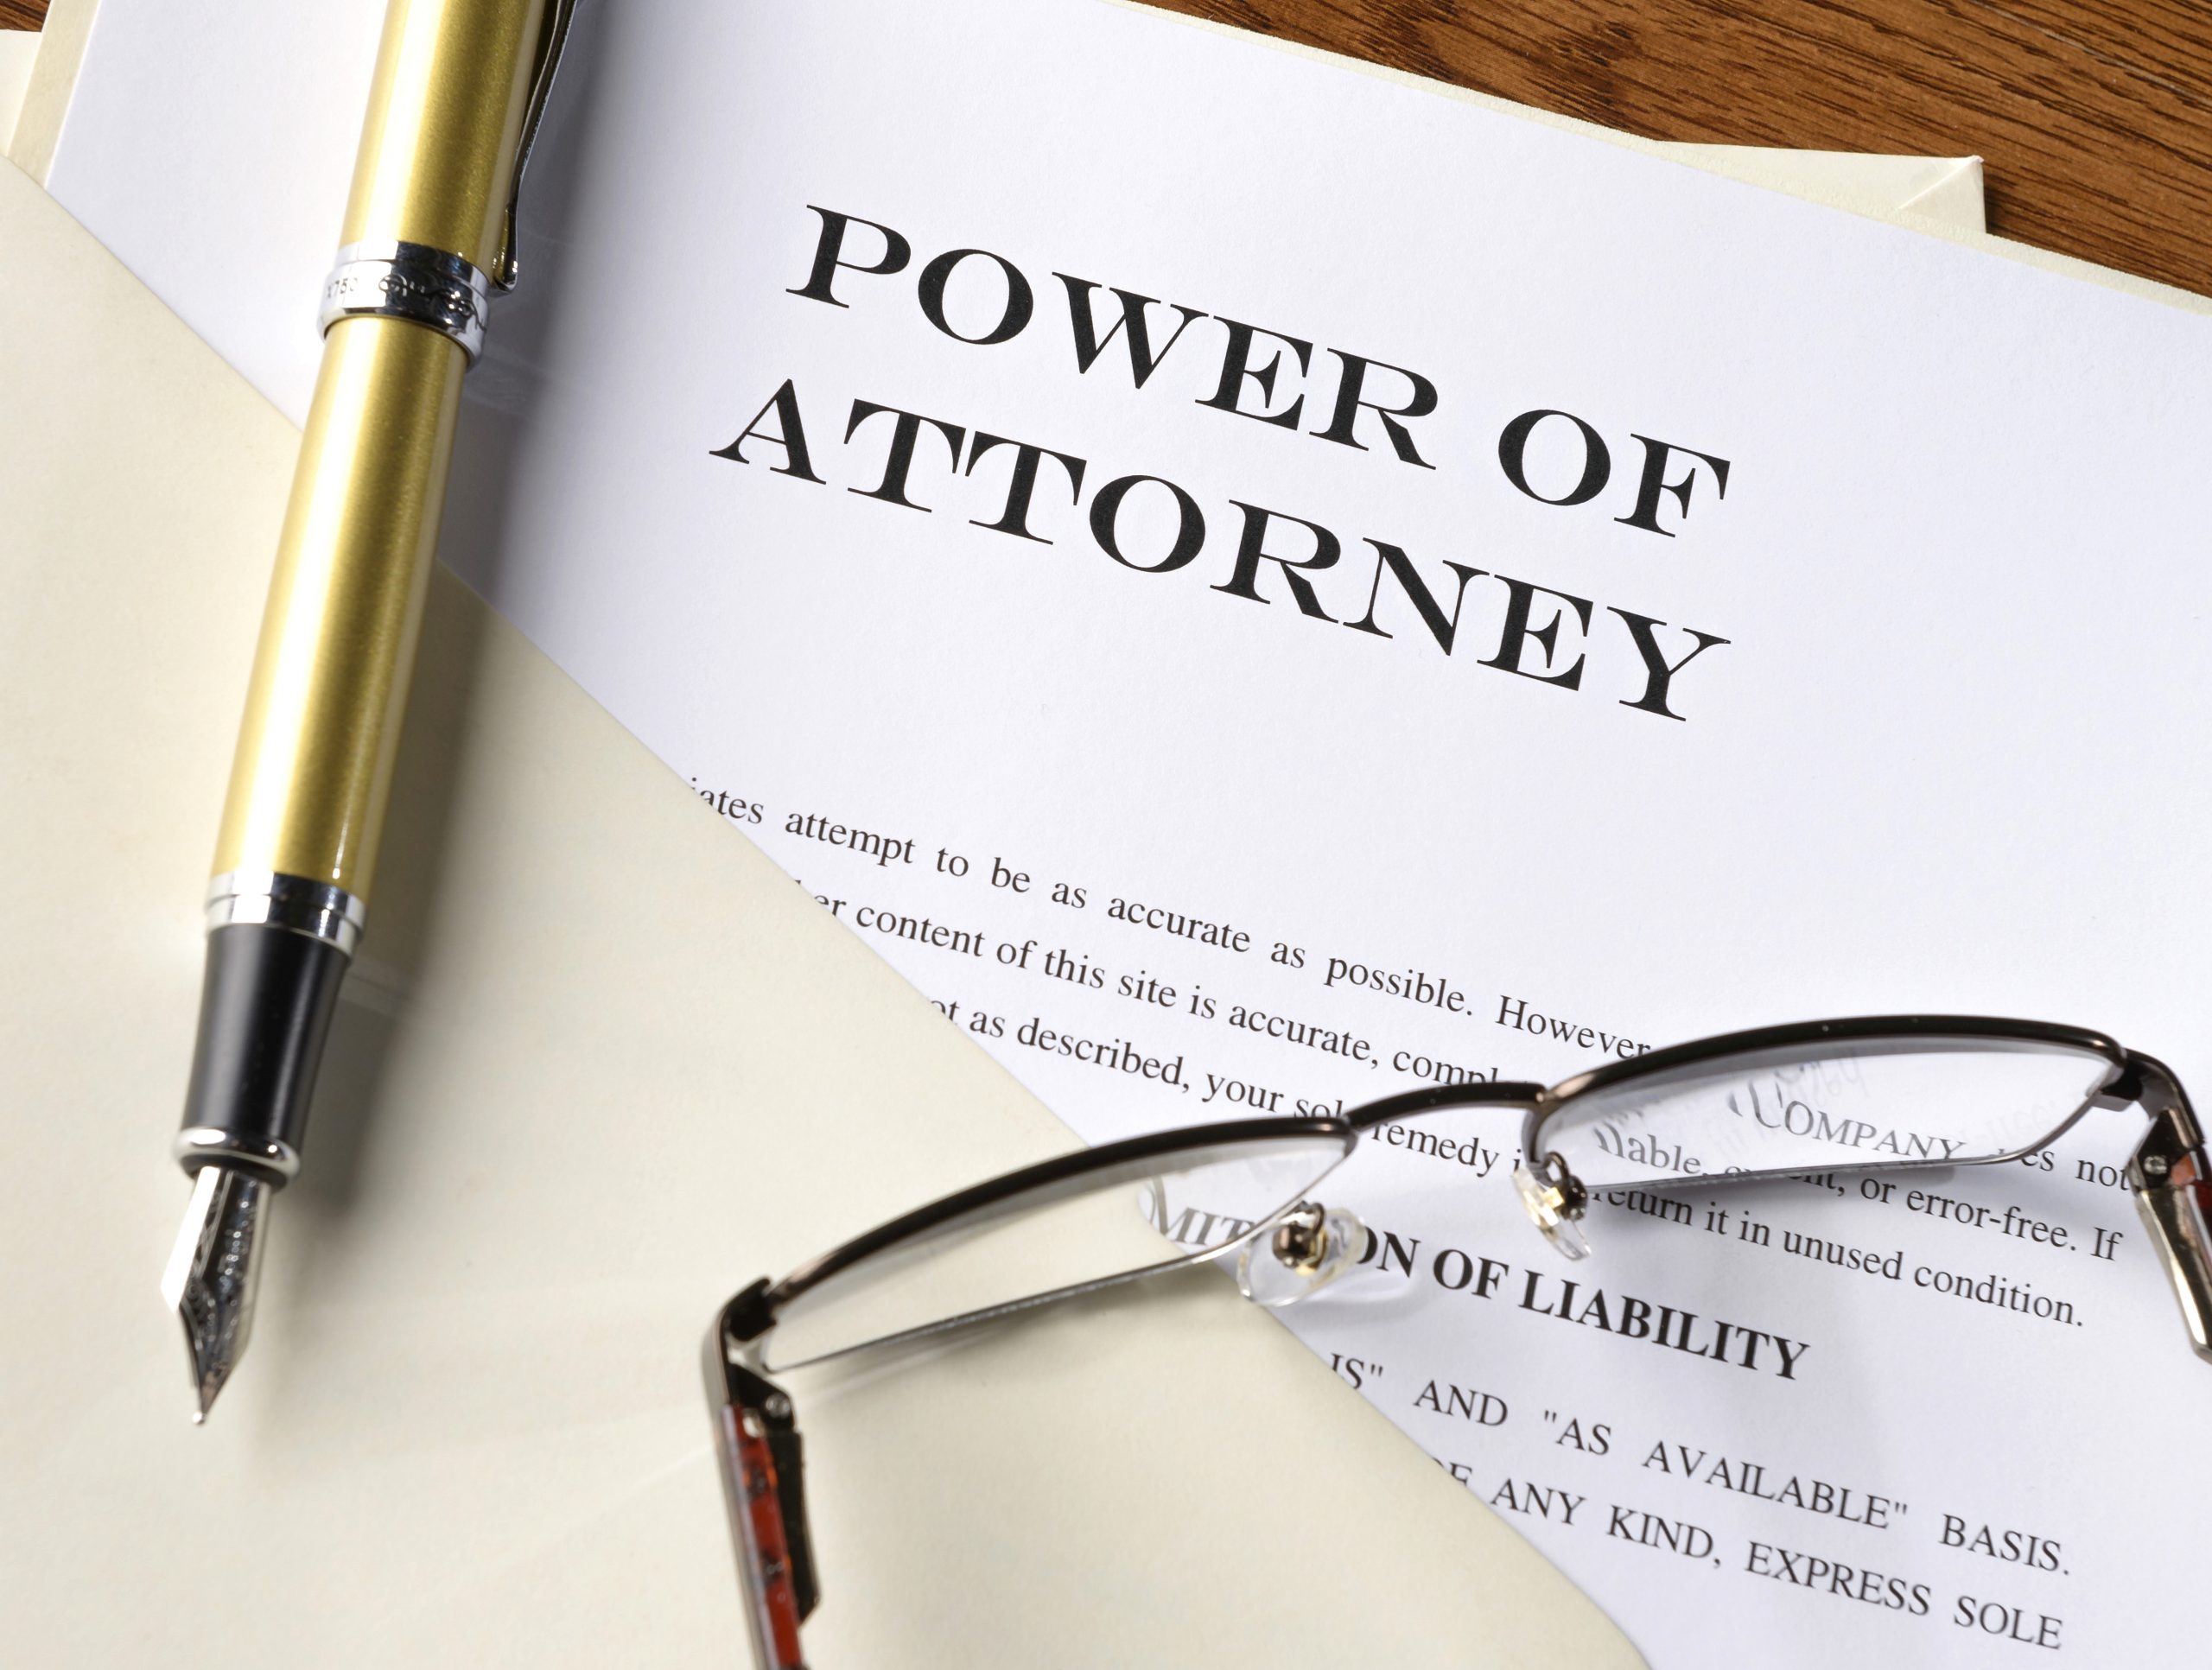 Maryland Power Of Attorney Lawyers Washington DC Legal Article Featured Image by Antonoplos & Associates